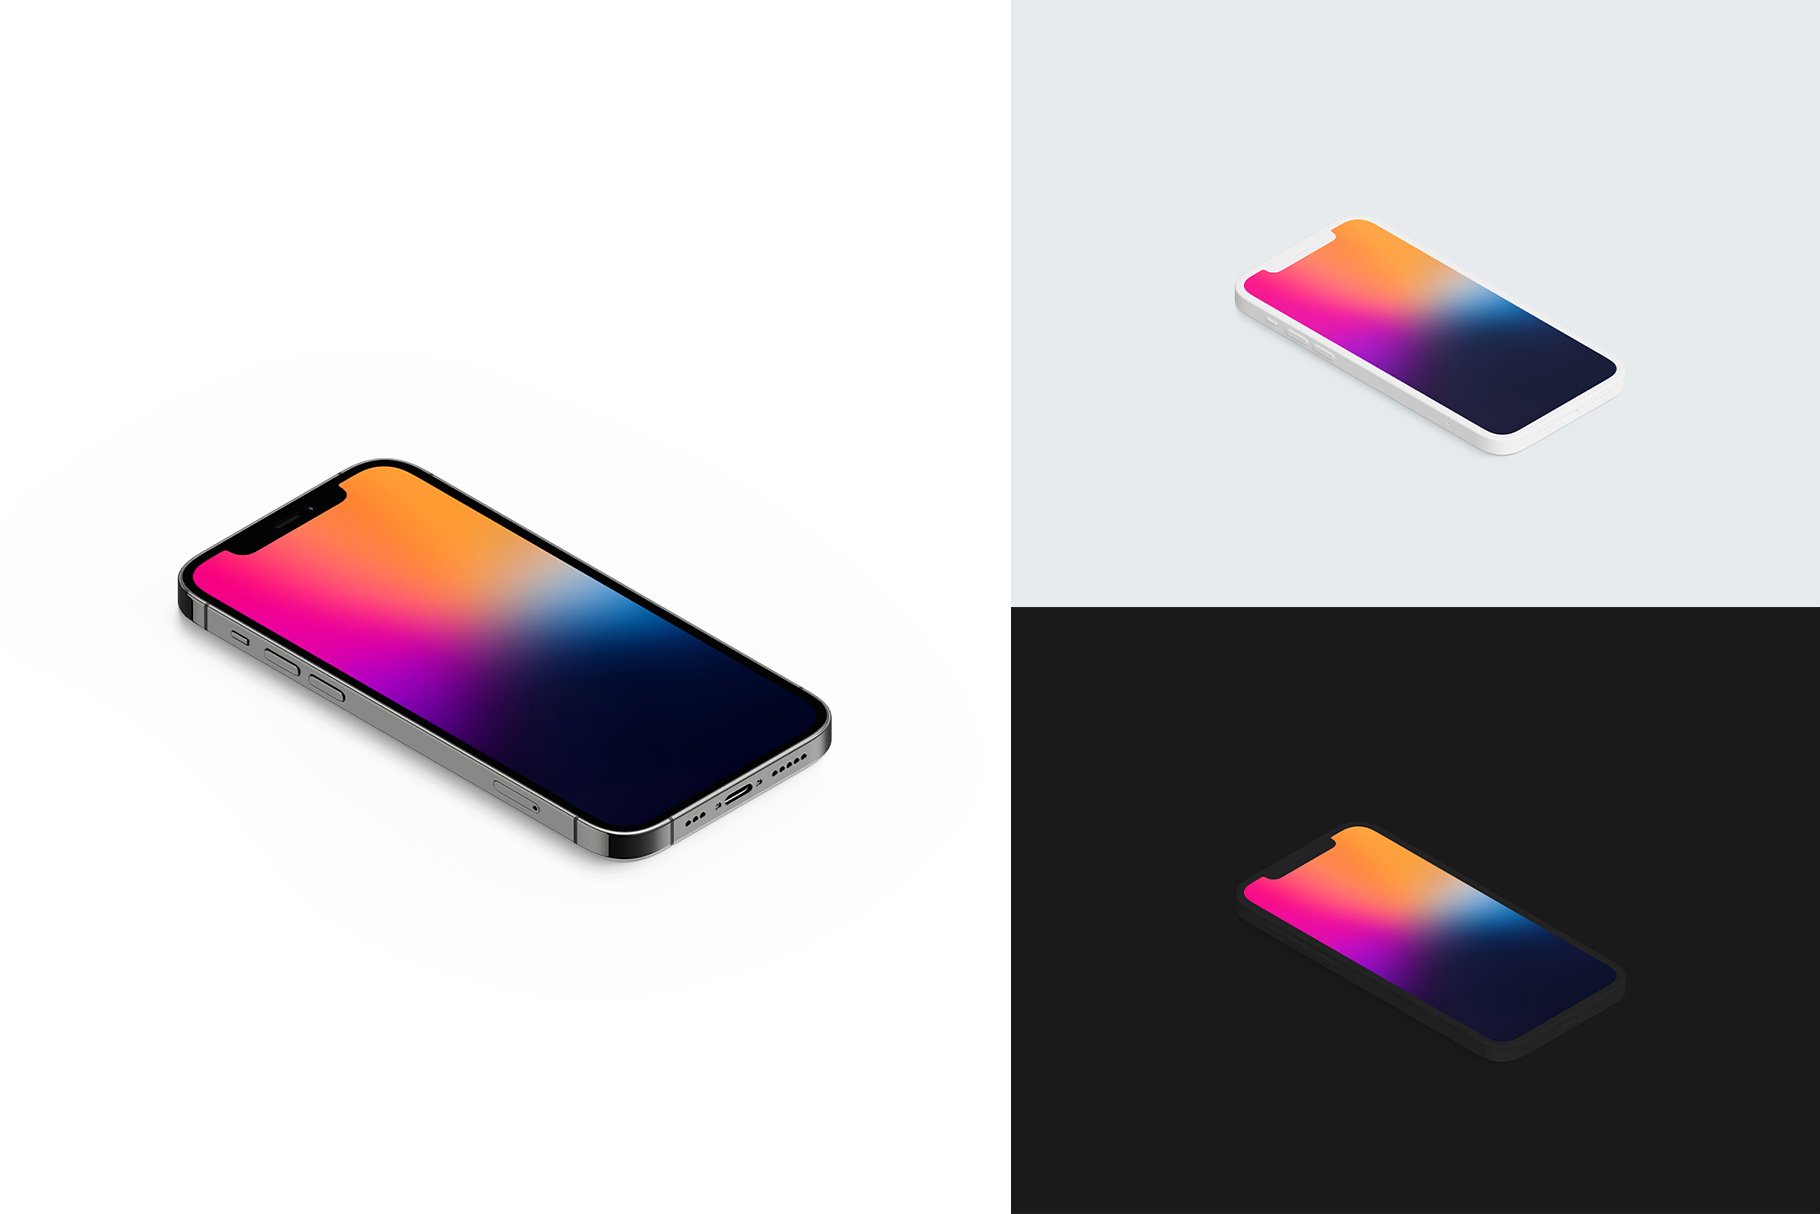 iphone 12 pro mockup pack by anthony boyd graphics 288c29 819